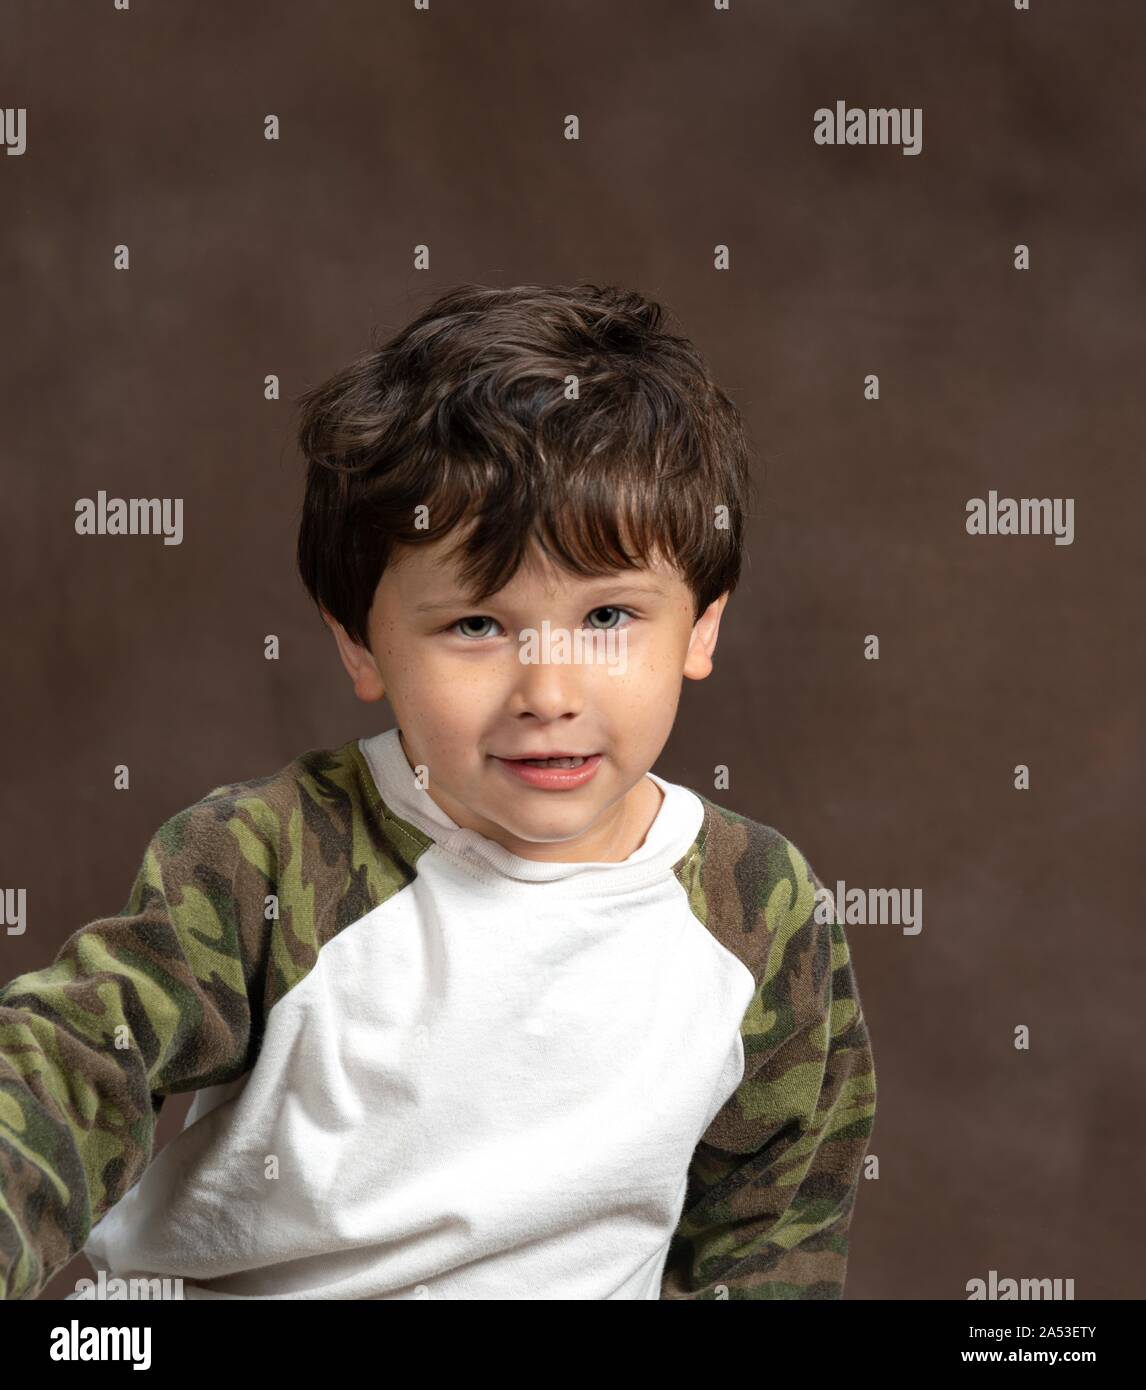 Vertical studio shot of a suspicious but cute four year old on a brown background with copy space. Stock Photo